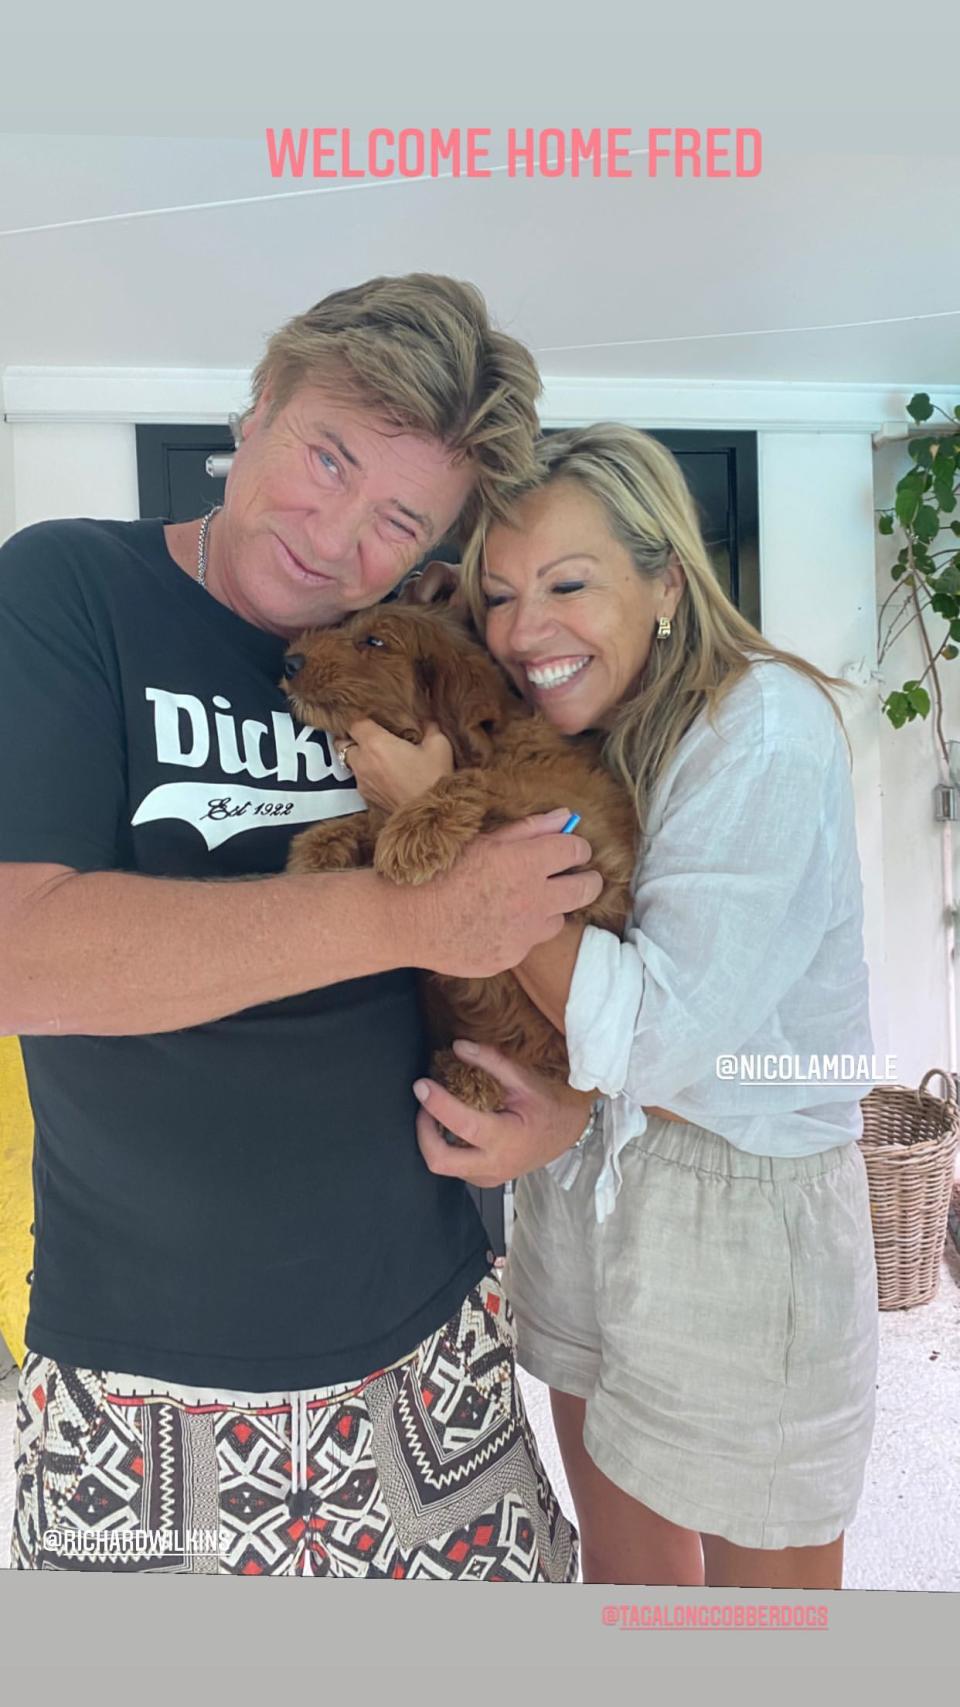 Richard Wilkins and Nicola Dale have welcomed a new addition to their 'ever-expanding' family. Photo: Instagram/richardwilkins.